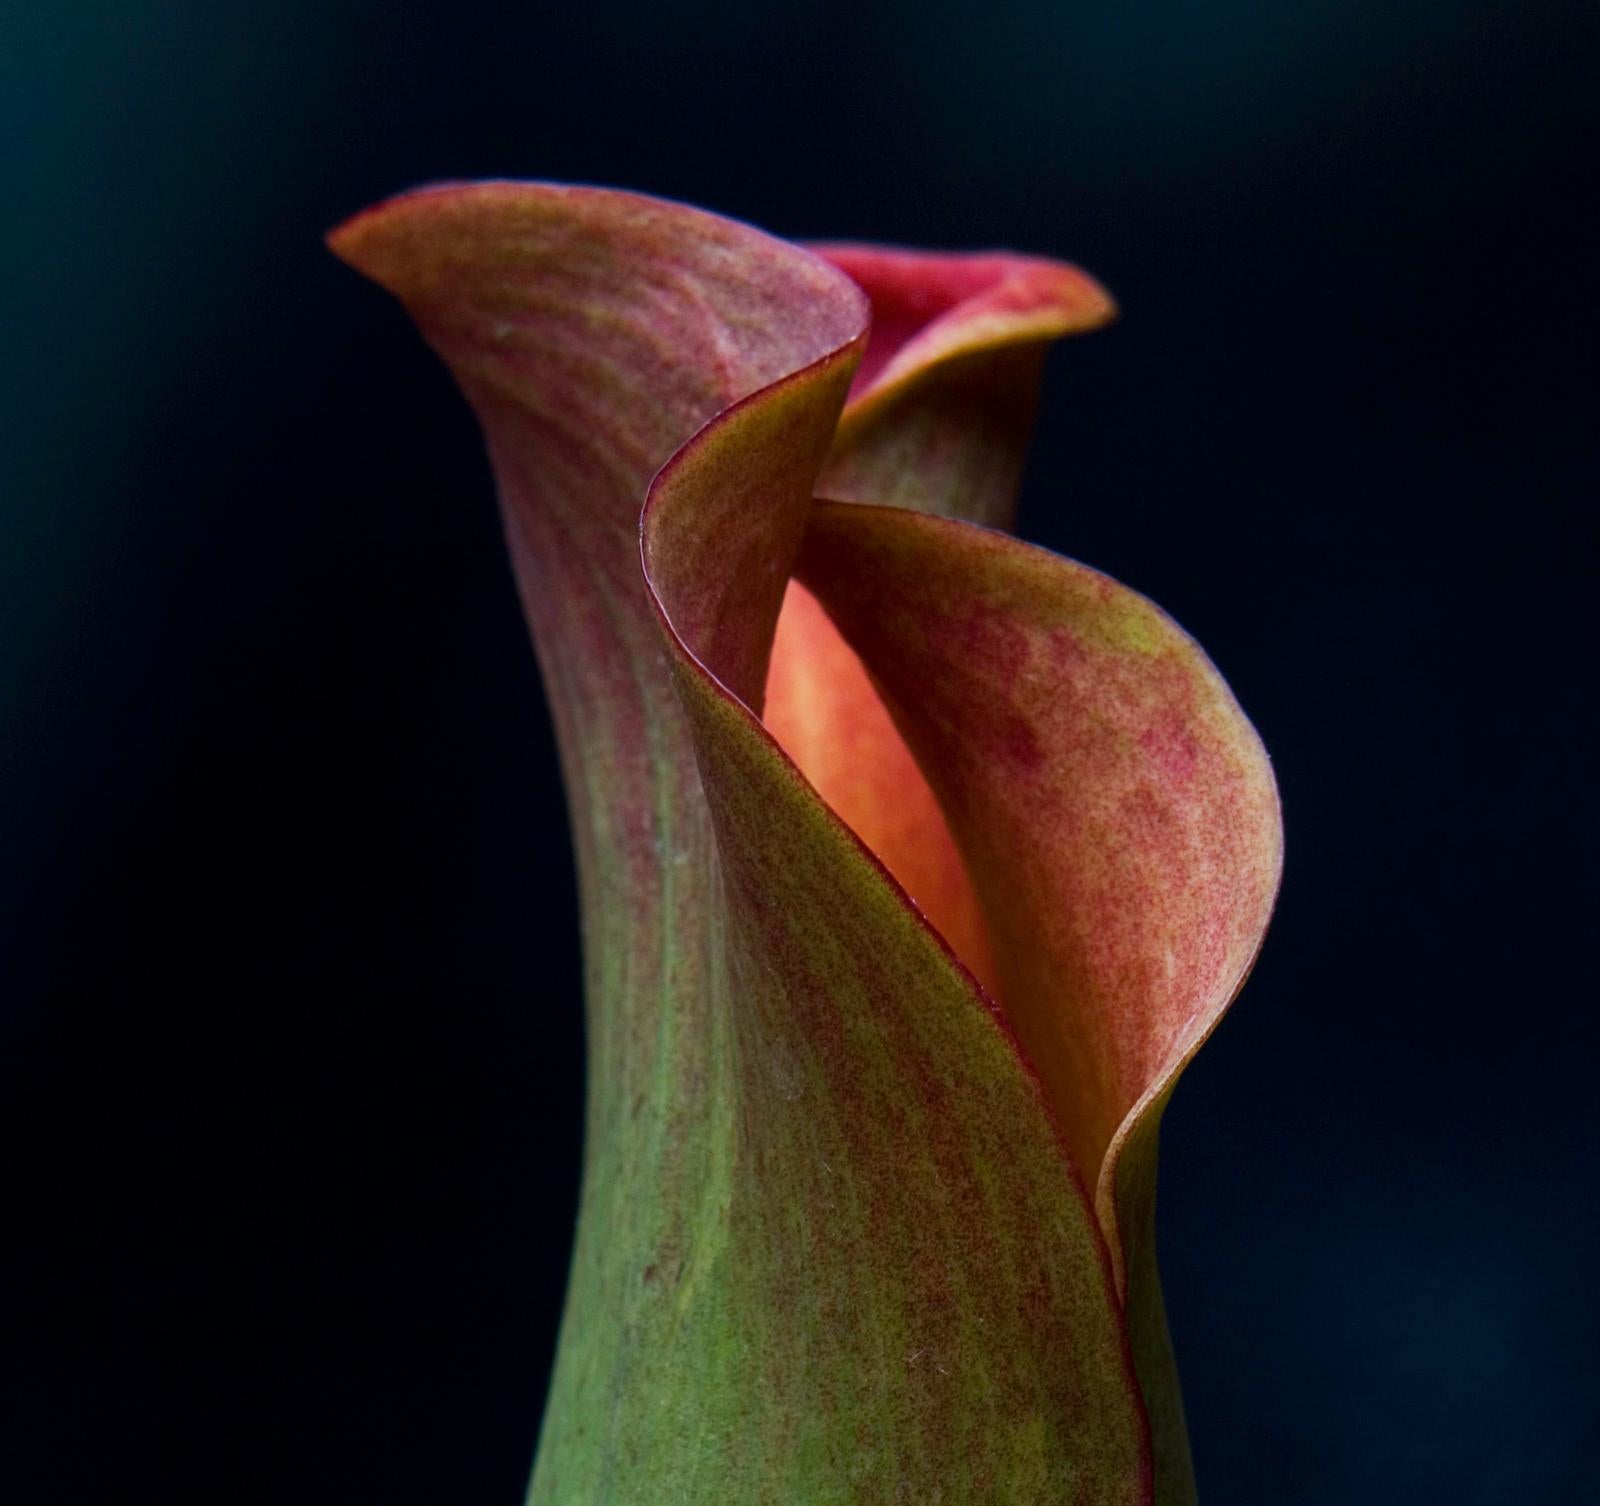 Signed limited edition fine art print, Romantic photo, Black Red Green, Flower 2 - Photograph by Ian Sanderson